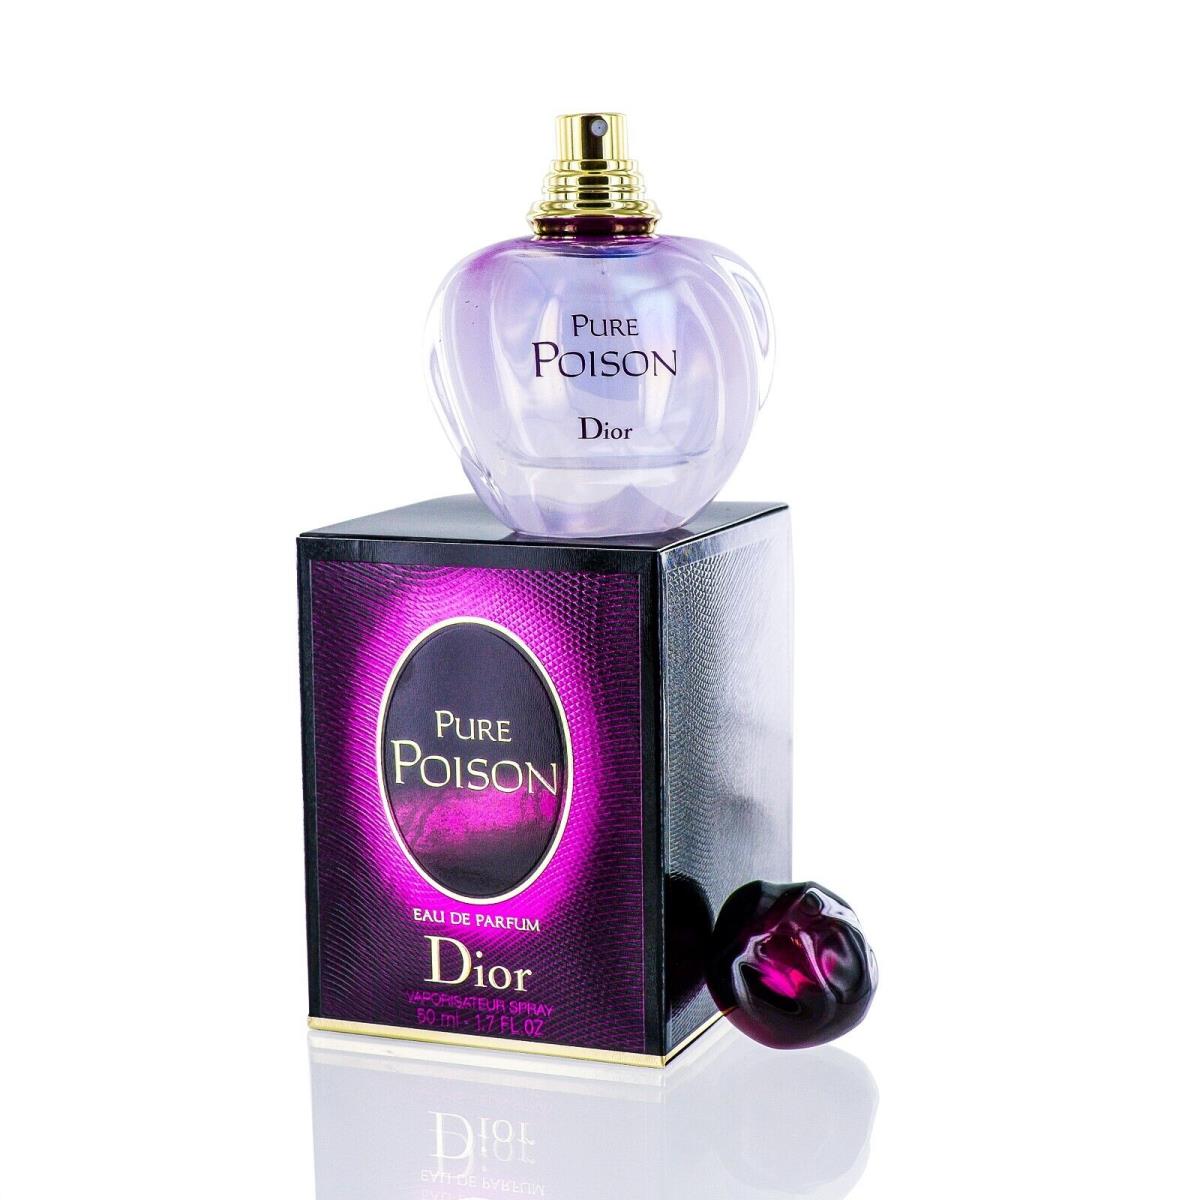 Pure Poison BY Ch.dior Edp Spray 1.7 OZ For Women